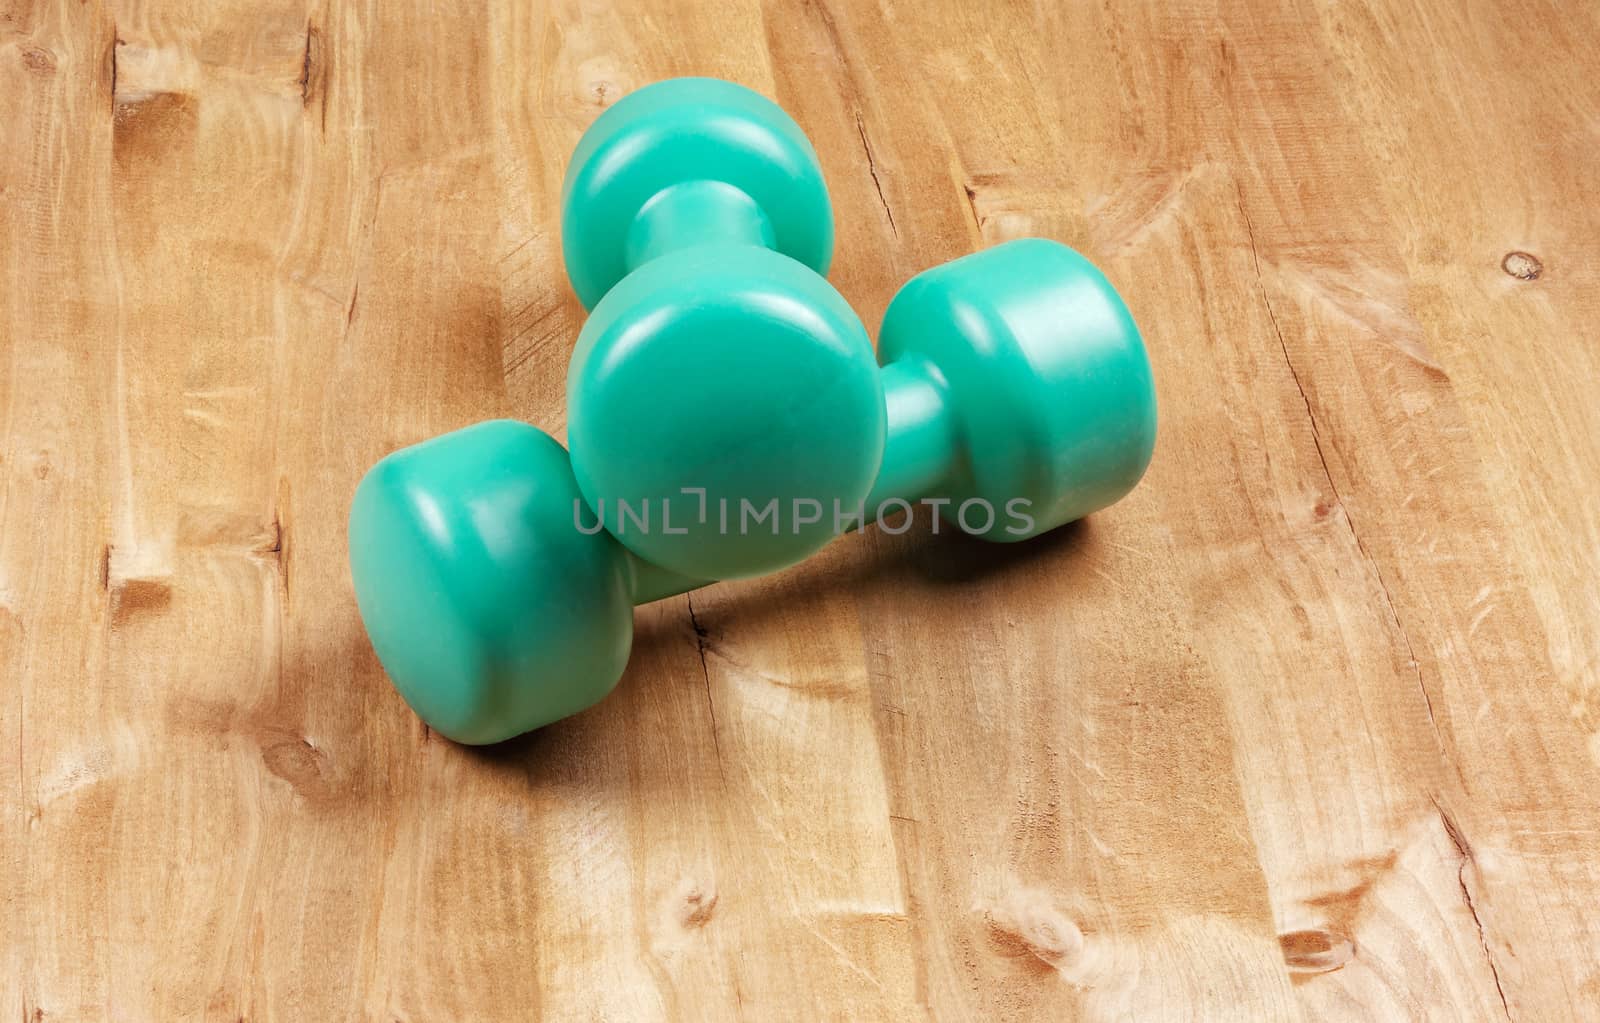 On the wooden surface are two dumbbells for sports by Grommik